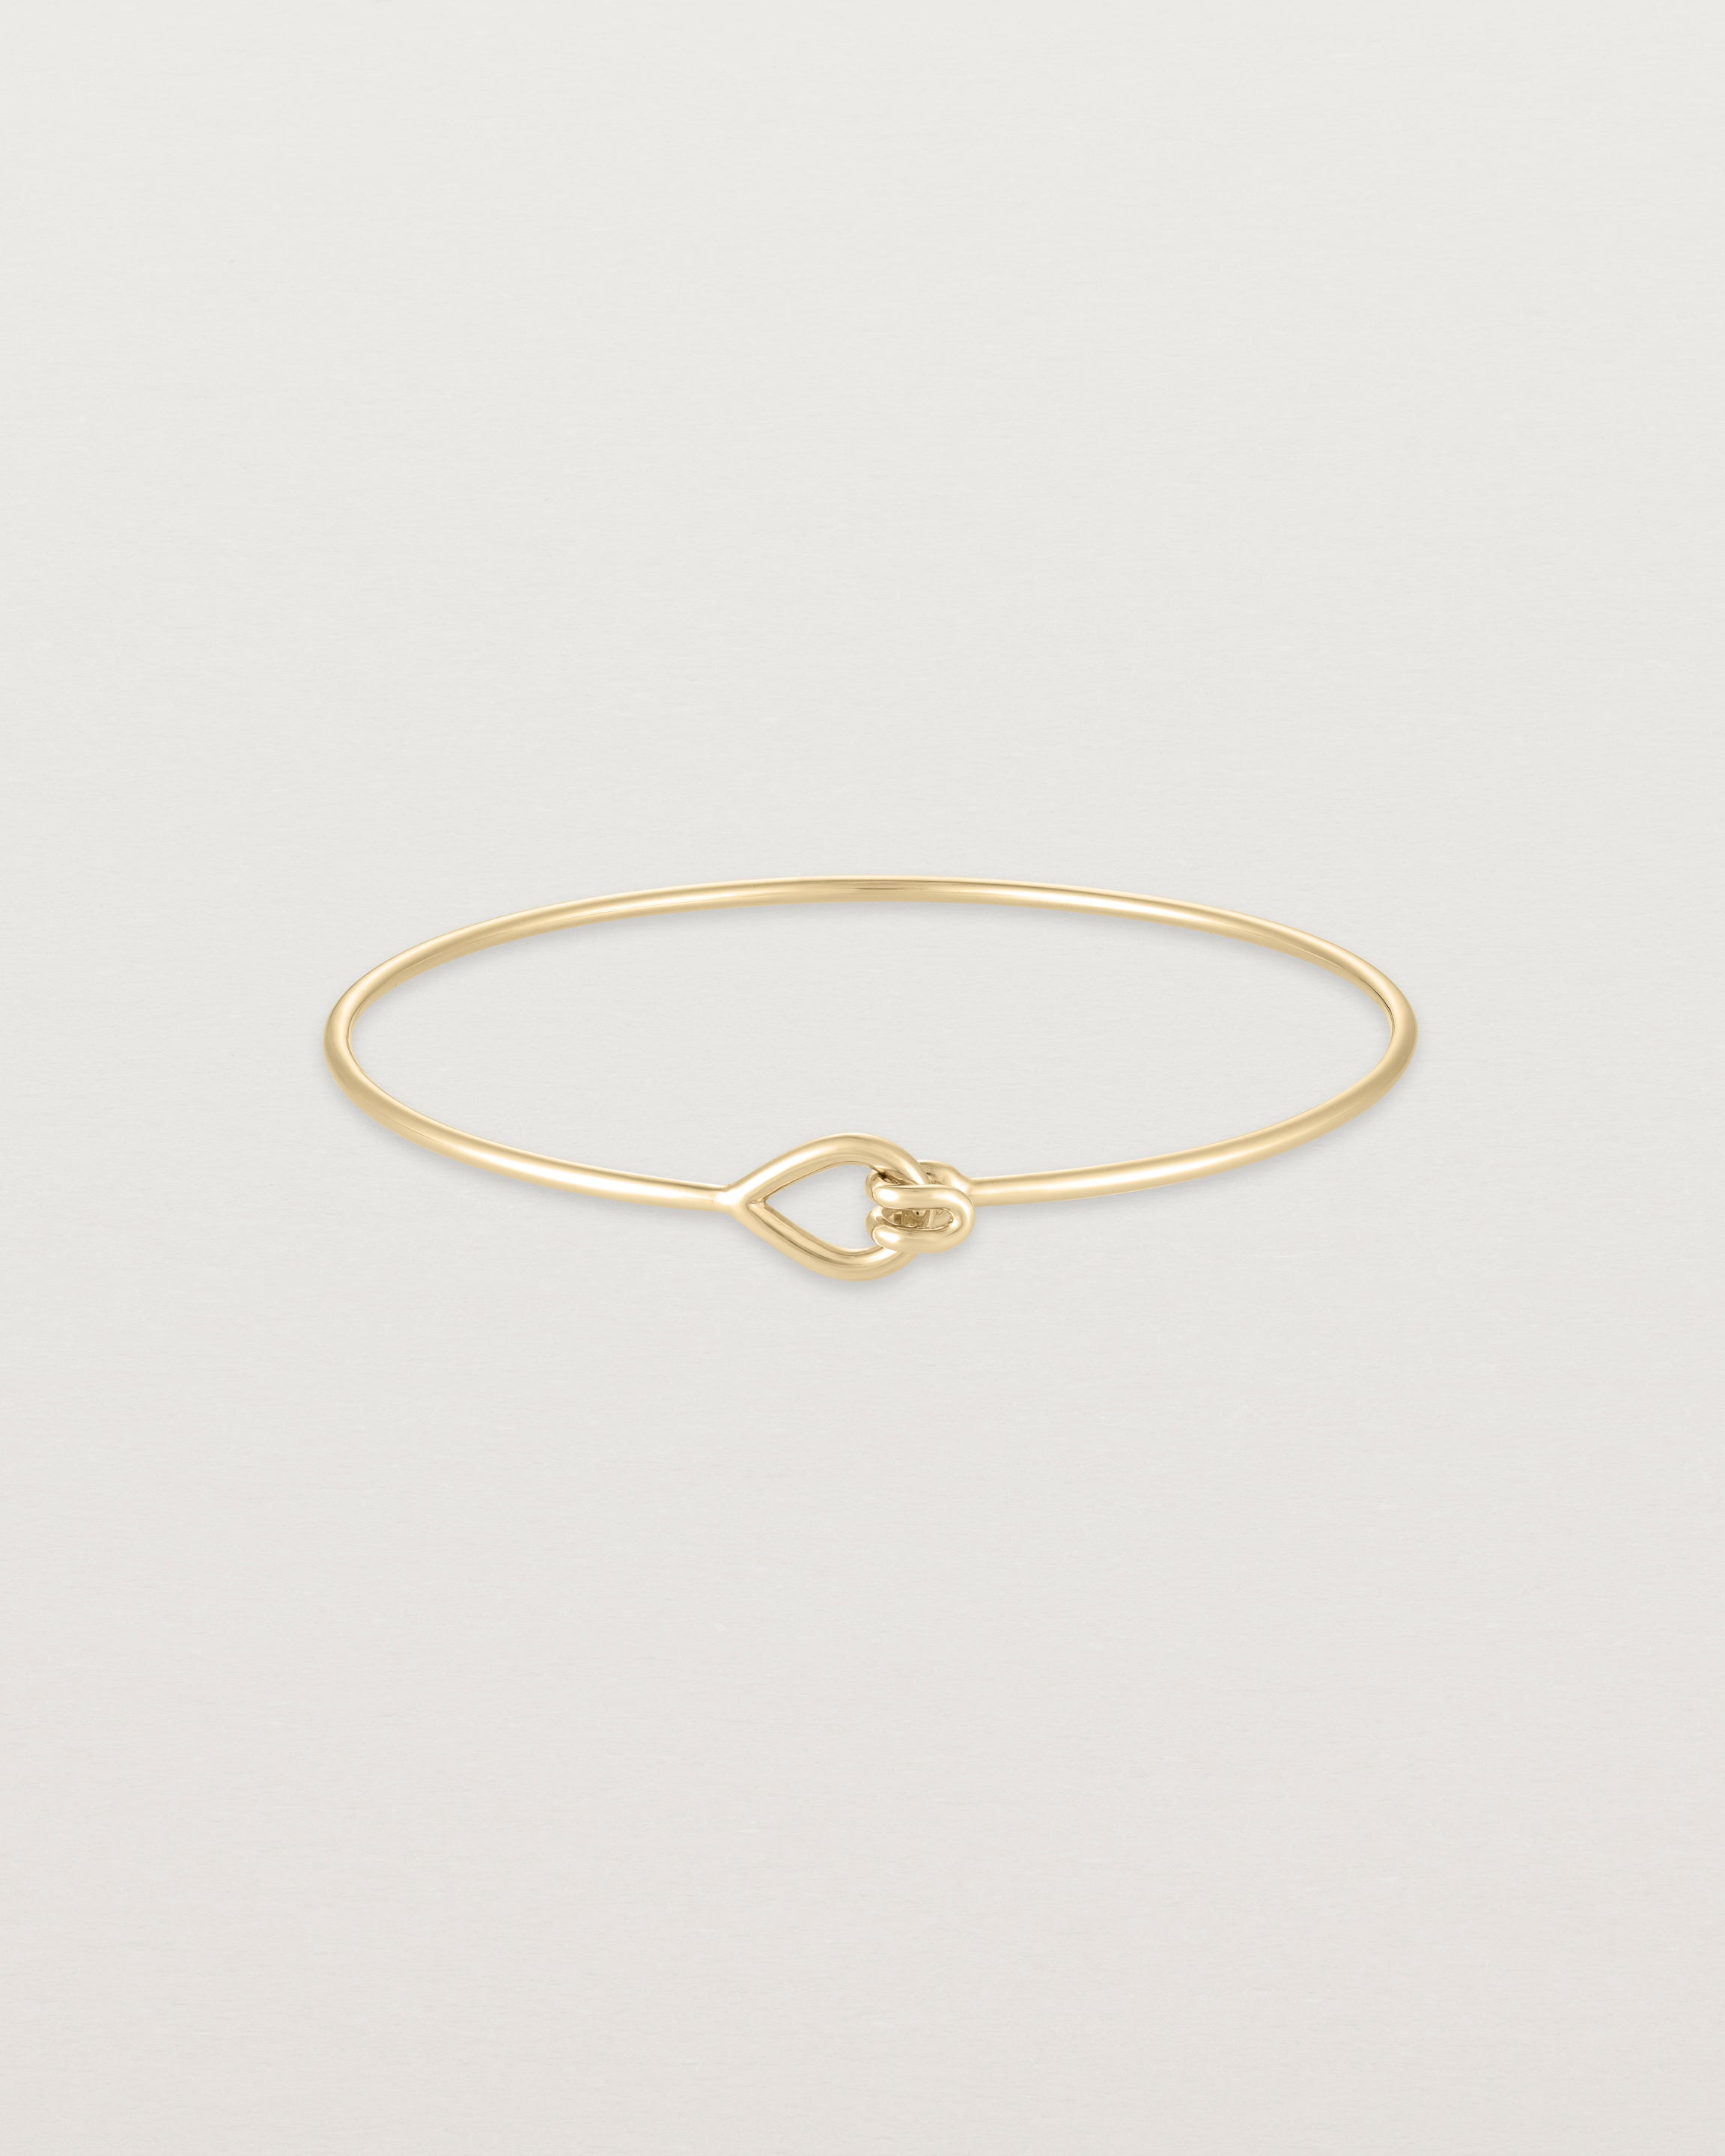 Front view of the Oana Bangle in yellow gold.